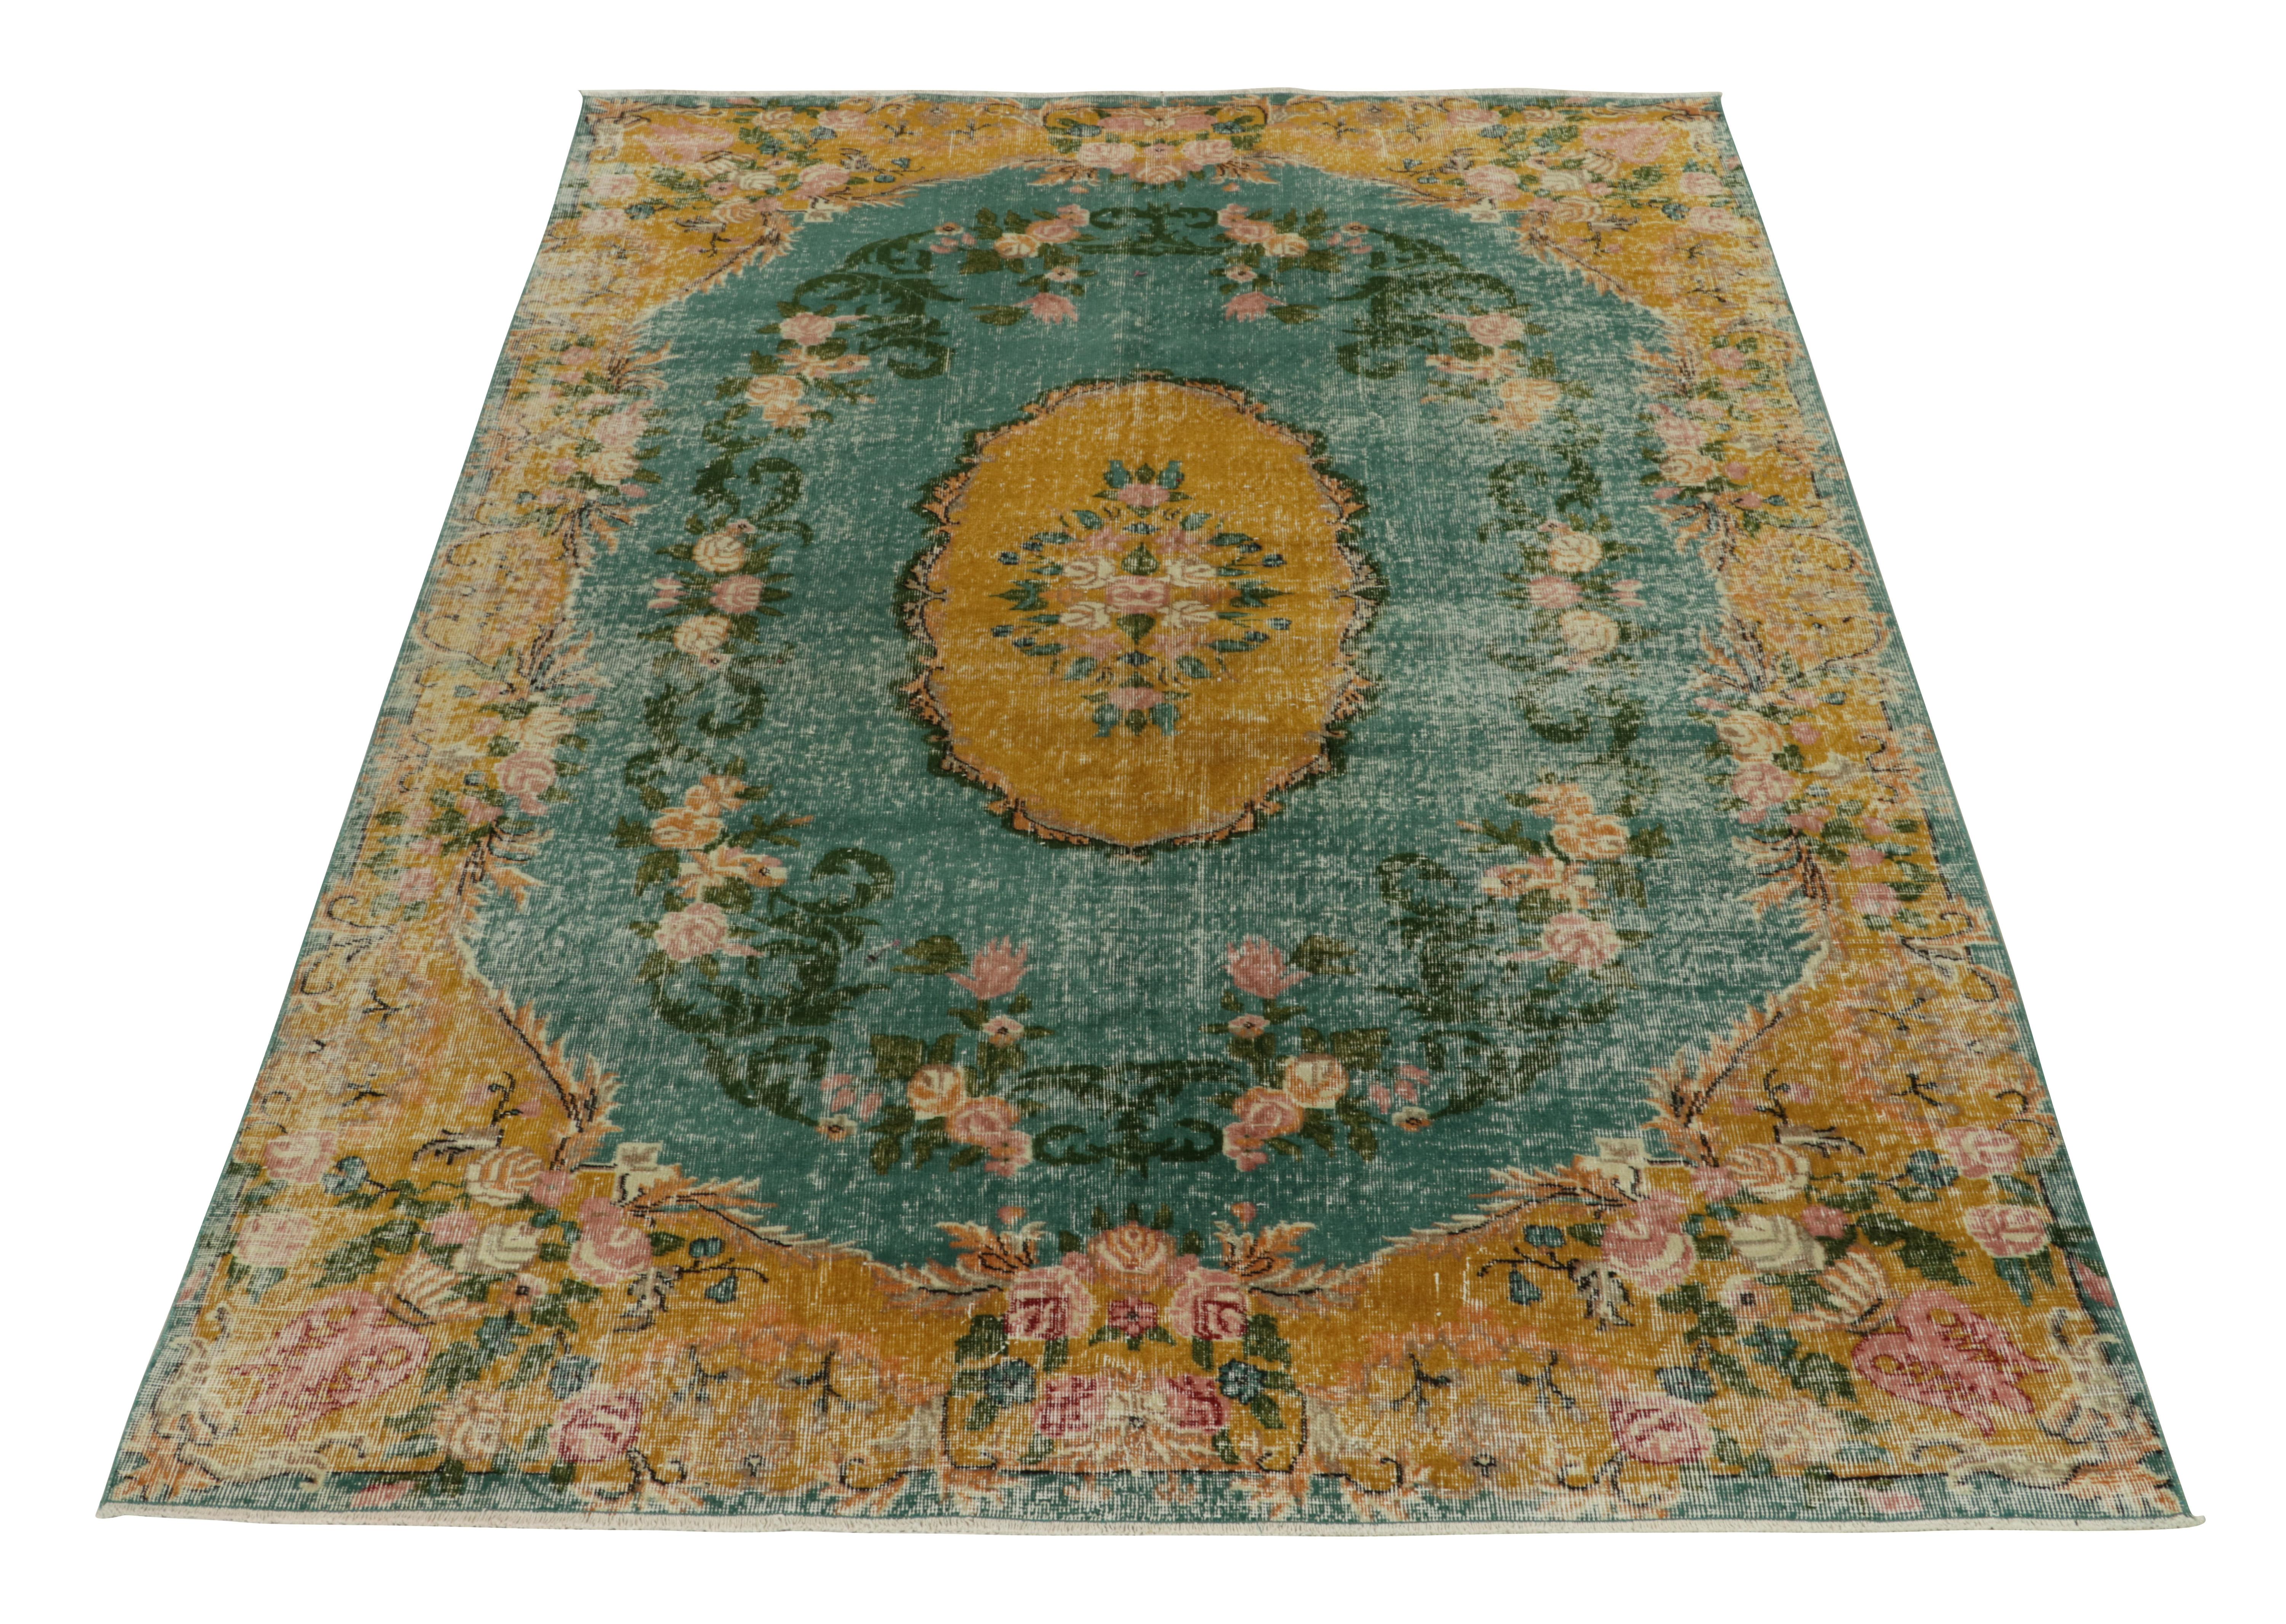 Hand-knotted in wool from Turkey circa 1960-1970, a vintage 7x10 distressed rug from a bold Turkish artist, joining Rug & Kilim’s Mid-Century Pasha Collection. 

Enjoying a beautiful medallion with an elegant European sensibility clearly uniquely